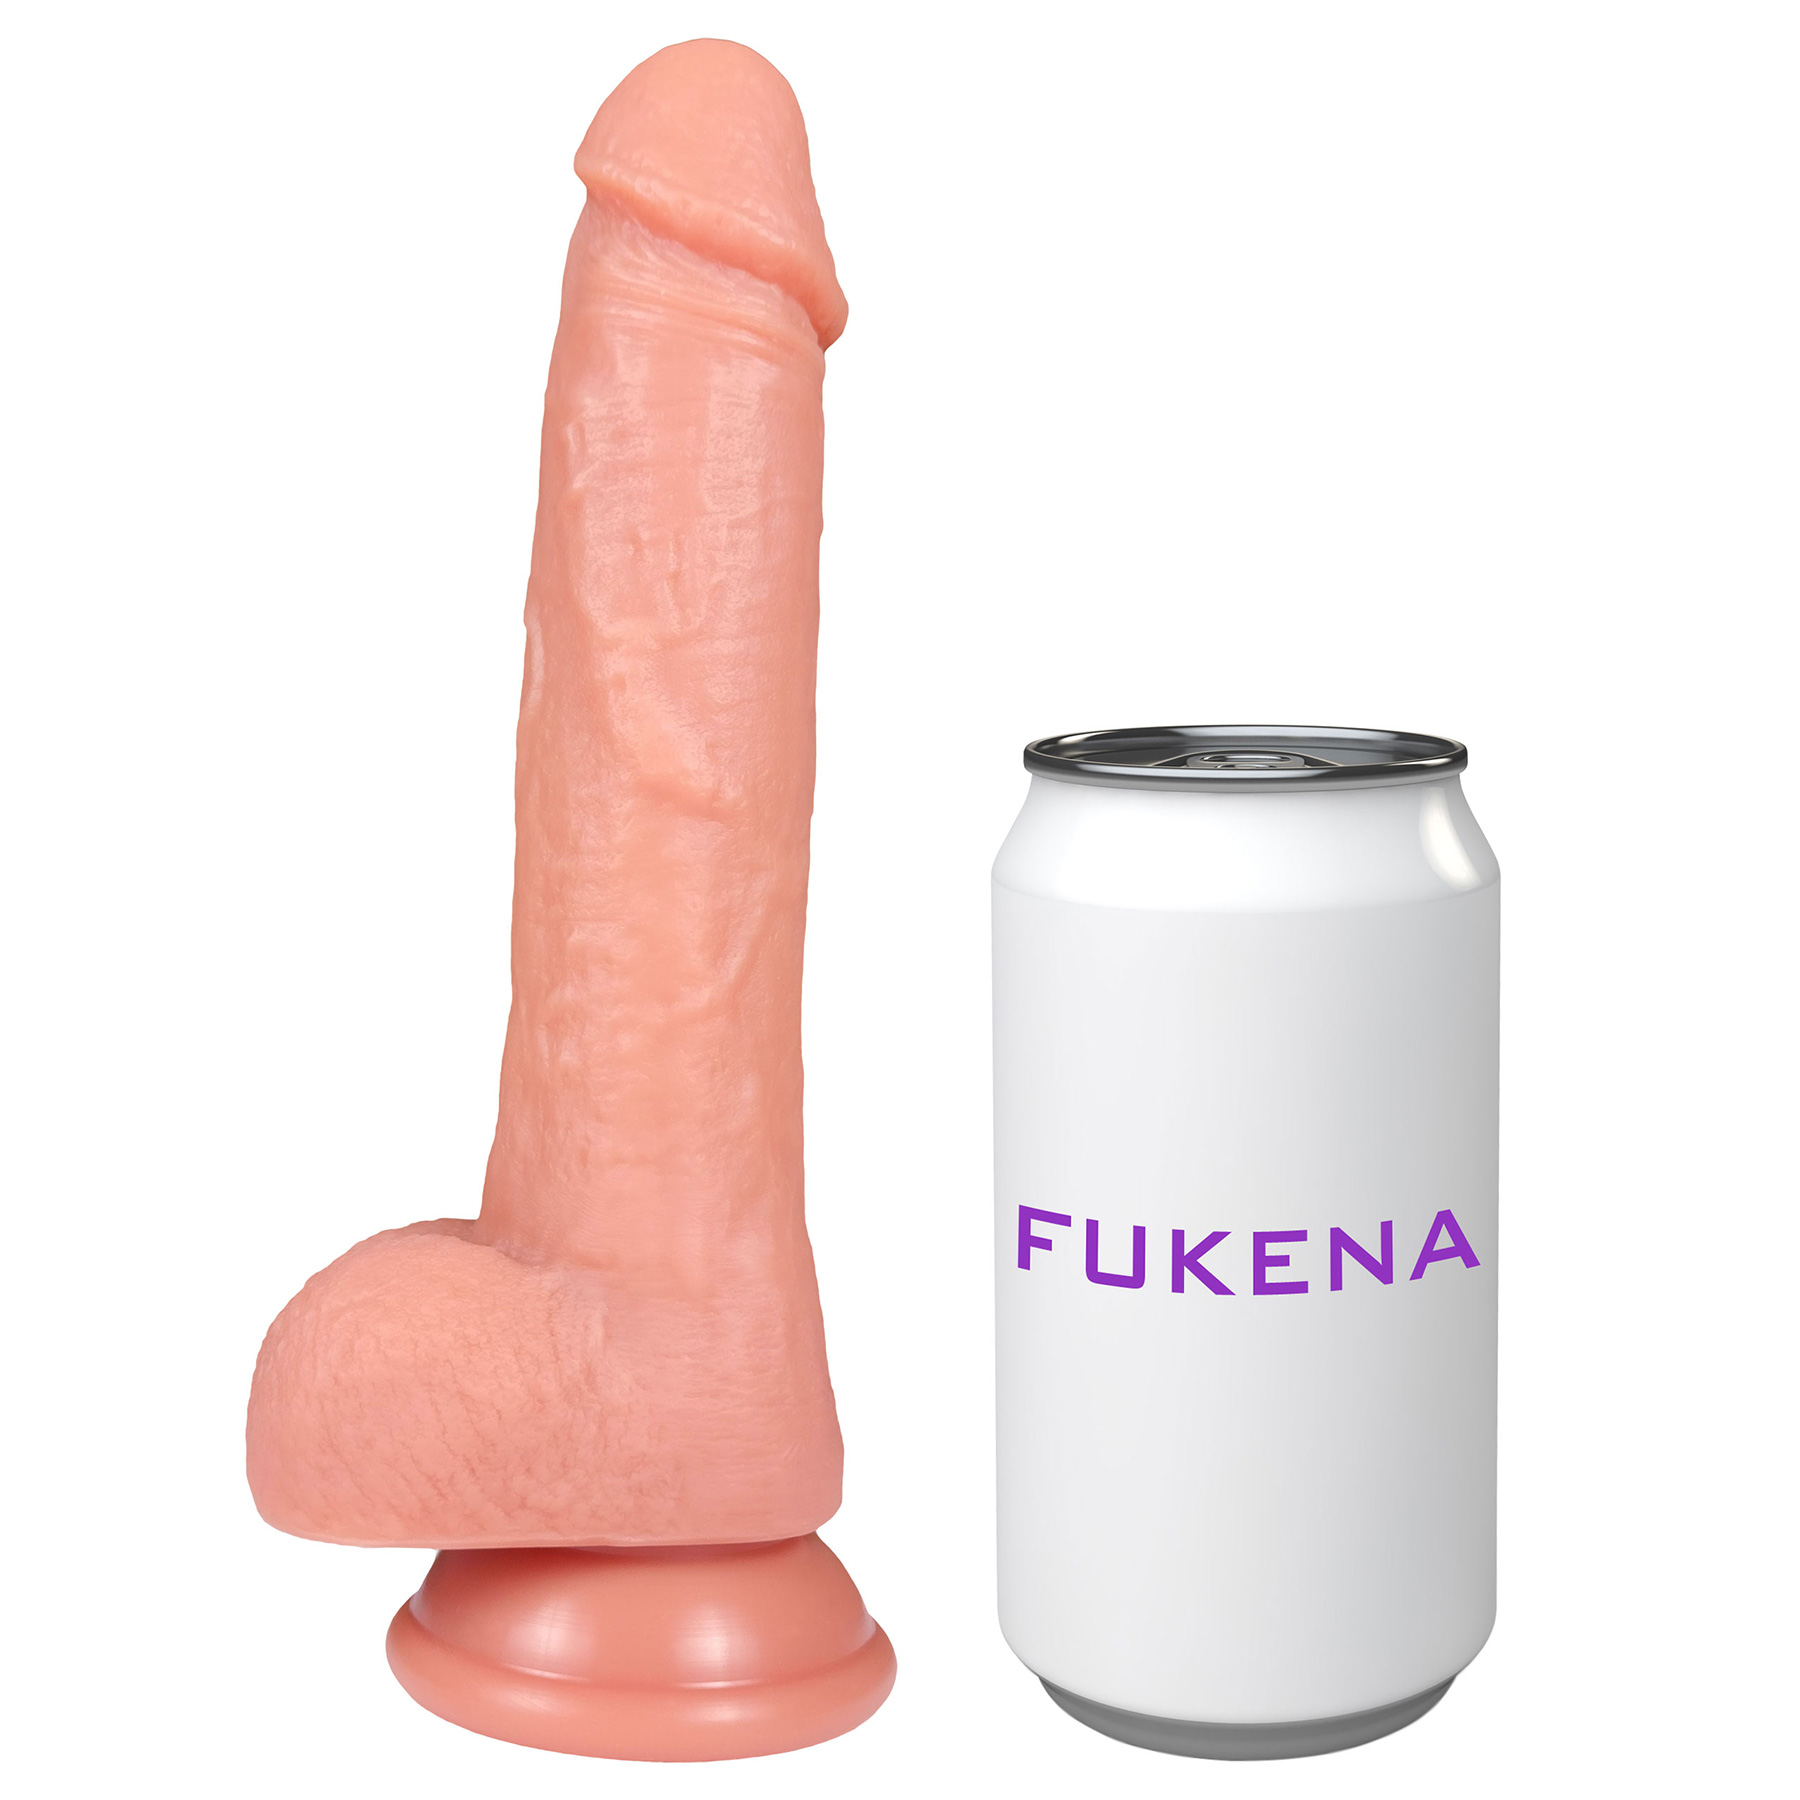 The Handyman 6.5 Inch Silicone Ultrarealistic Dildo With Balls & Suction Cup Base By Fukena - Measurements